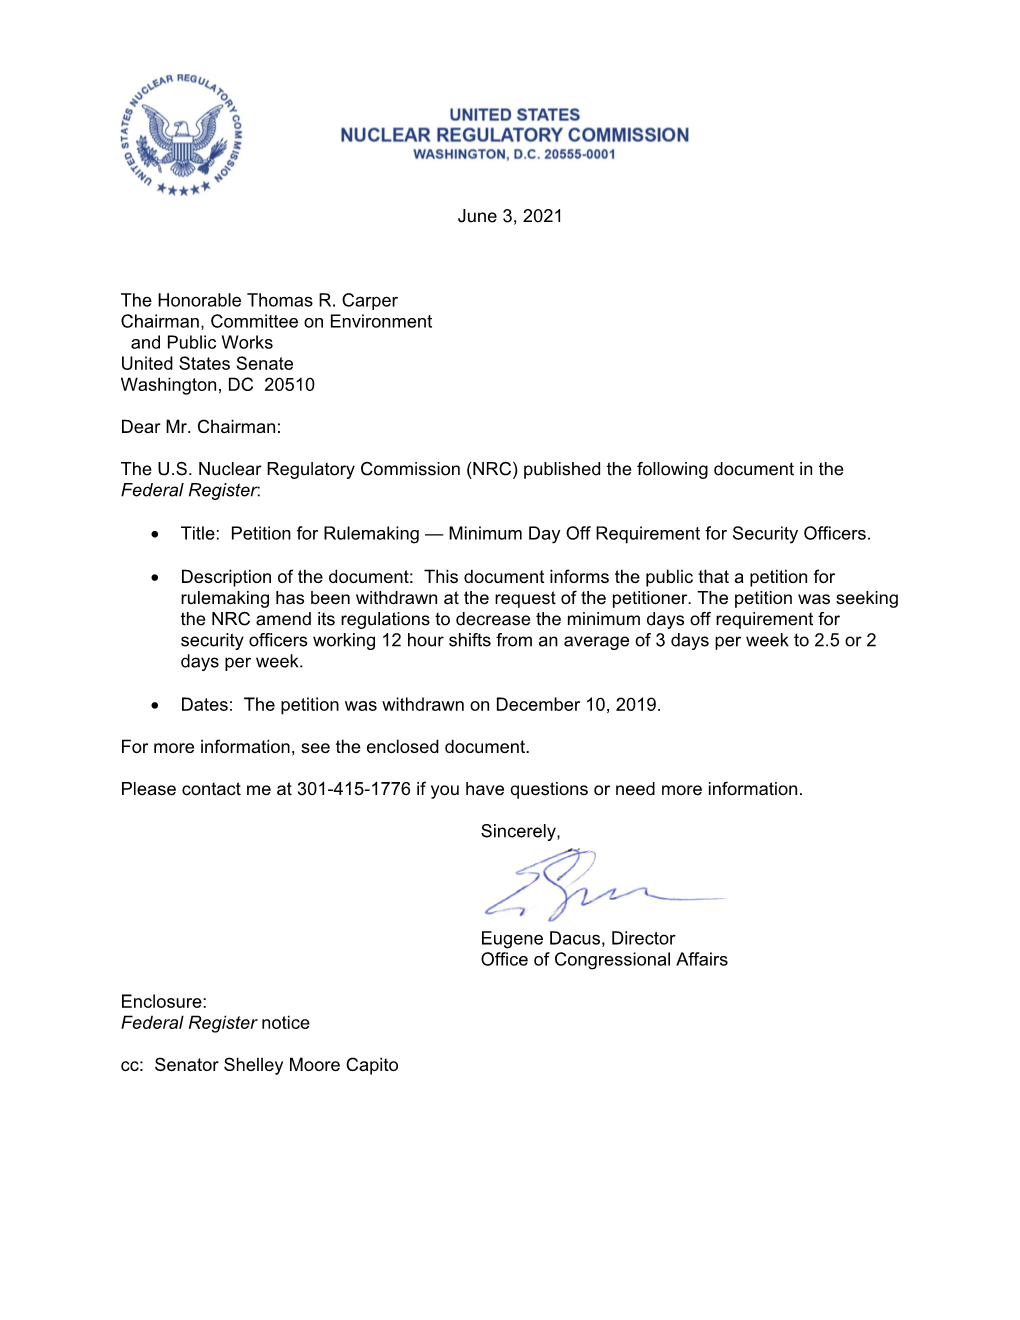 Congressional Letters, Notice of Withdrawal RE: Minimum Day Off